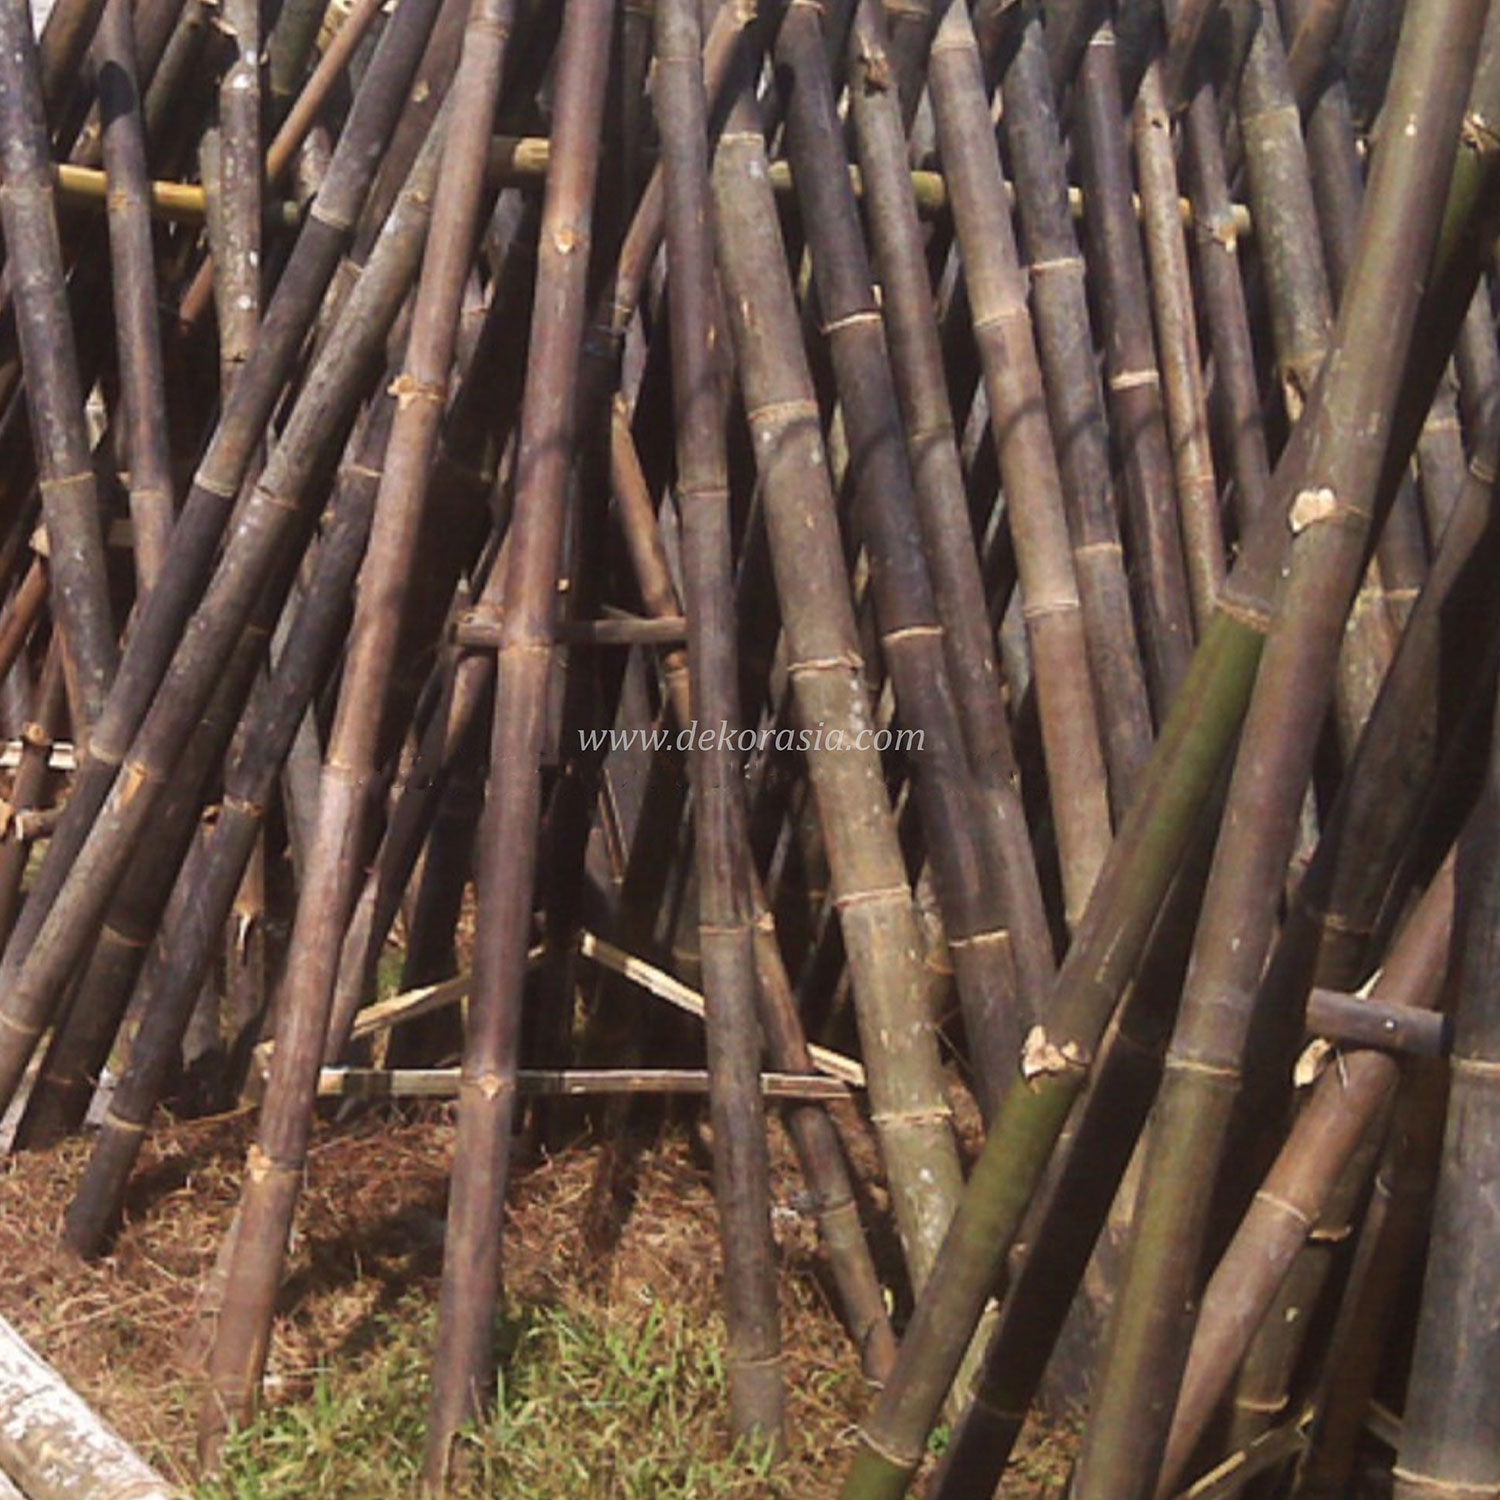 Black Bamboo Poles for Bamboo Fences and Bamboo Panels